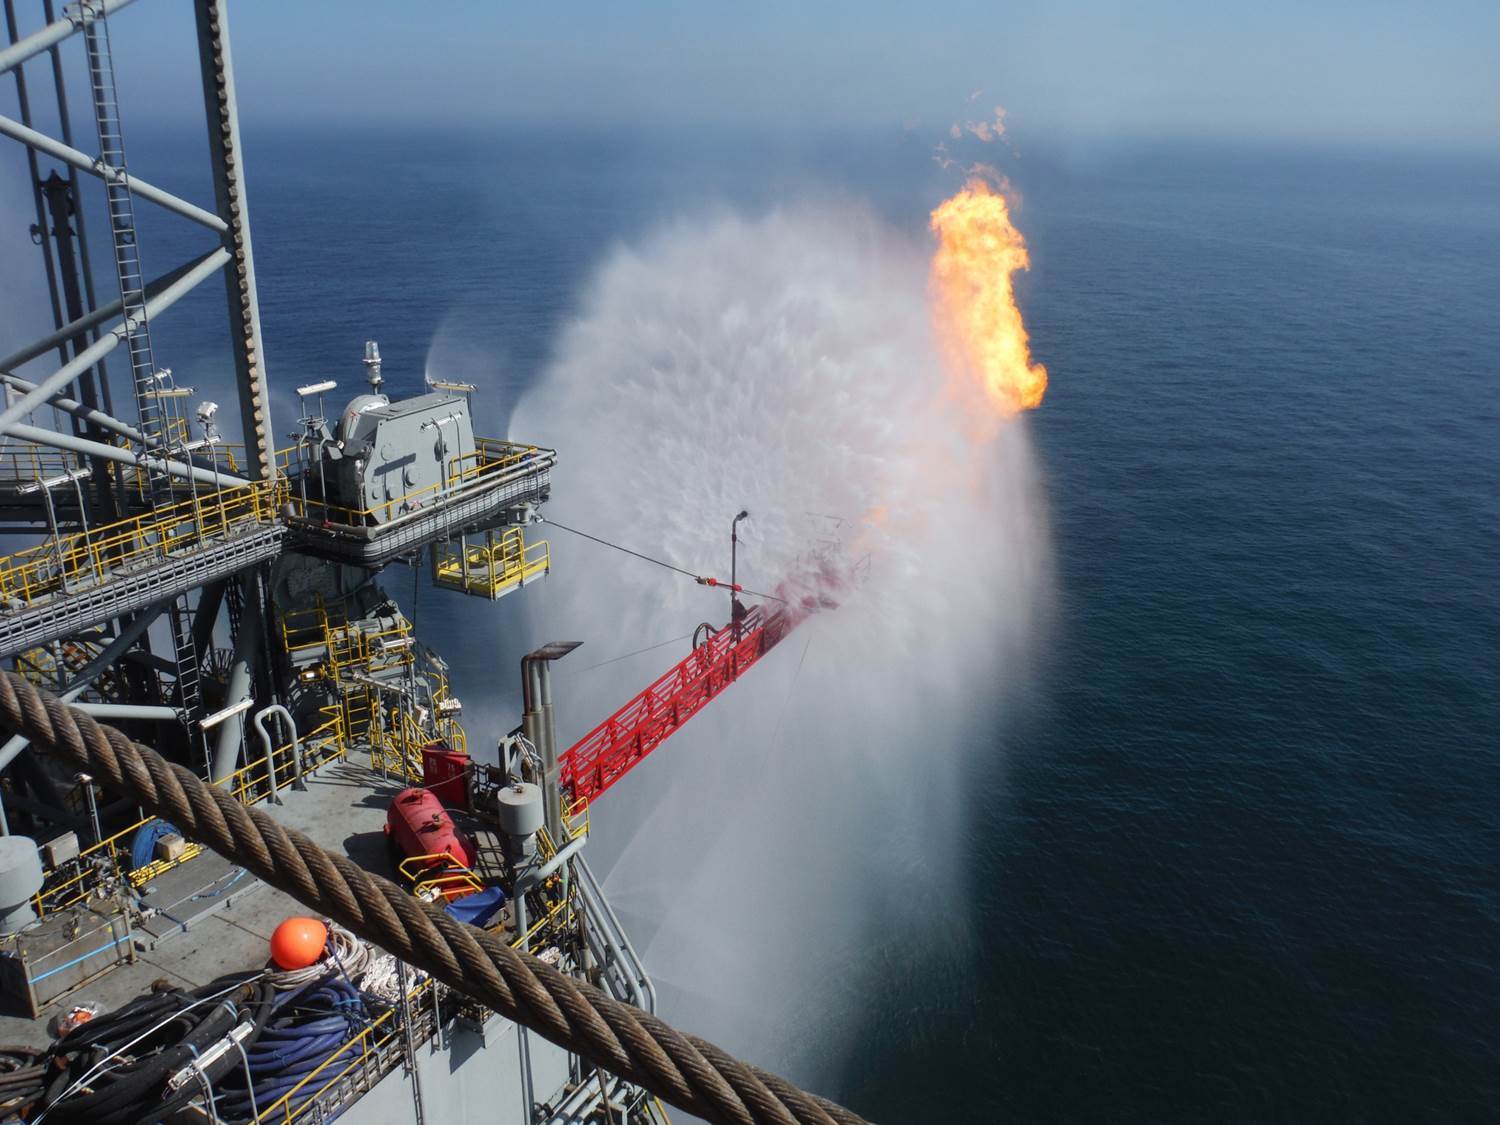 Rig Deluge develops fire safety systems for offshore platforms